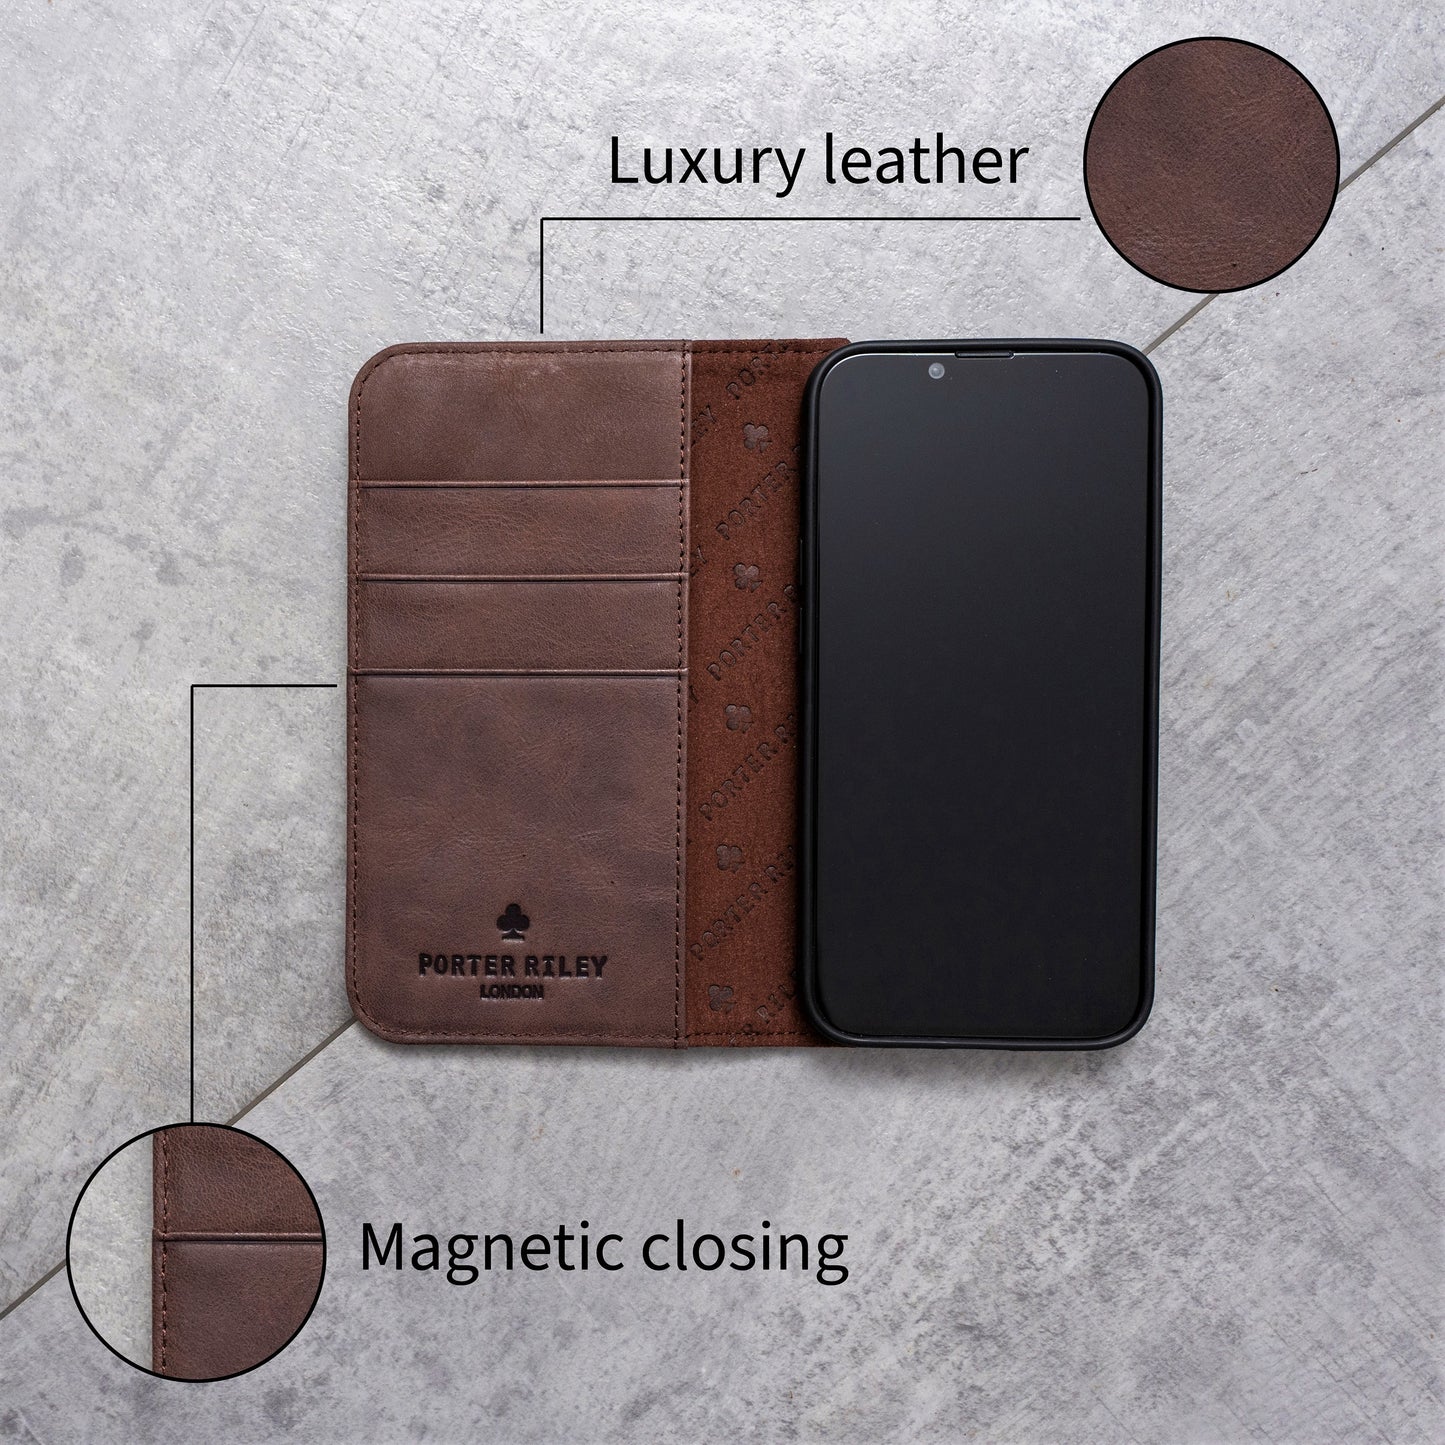 iPhone XS Max Leather Case. Premium Slim Genuine Leather Stand Case/Cover/Wallet (Chocolate Brown)